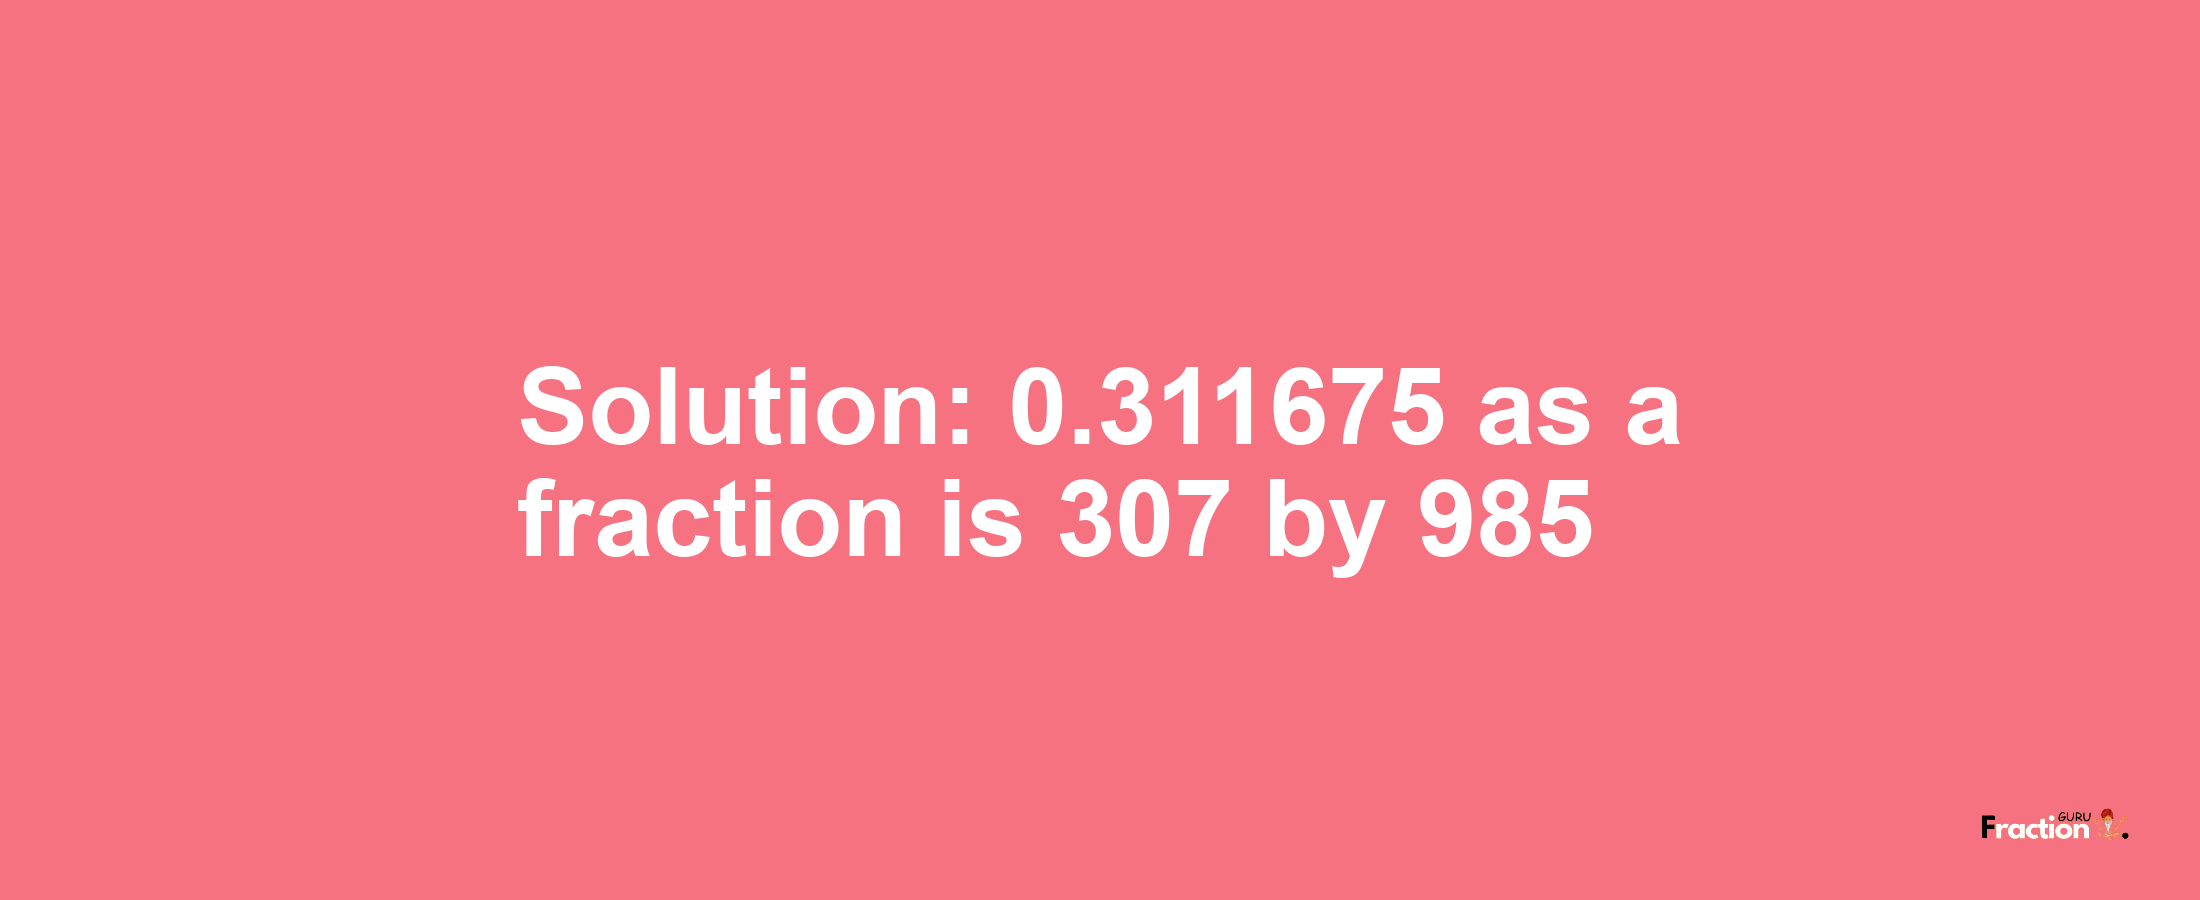 Solution:0.311675 as a fraction is 307/985